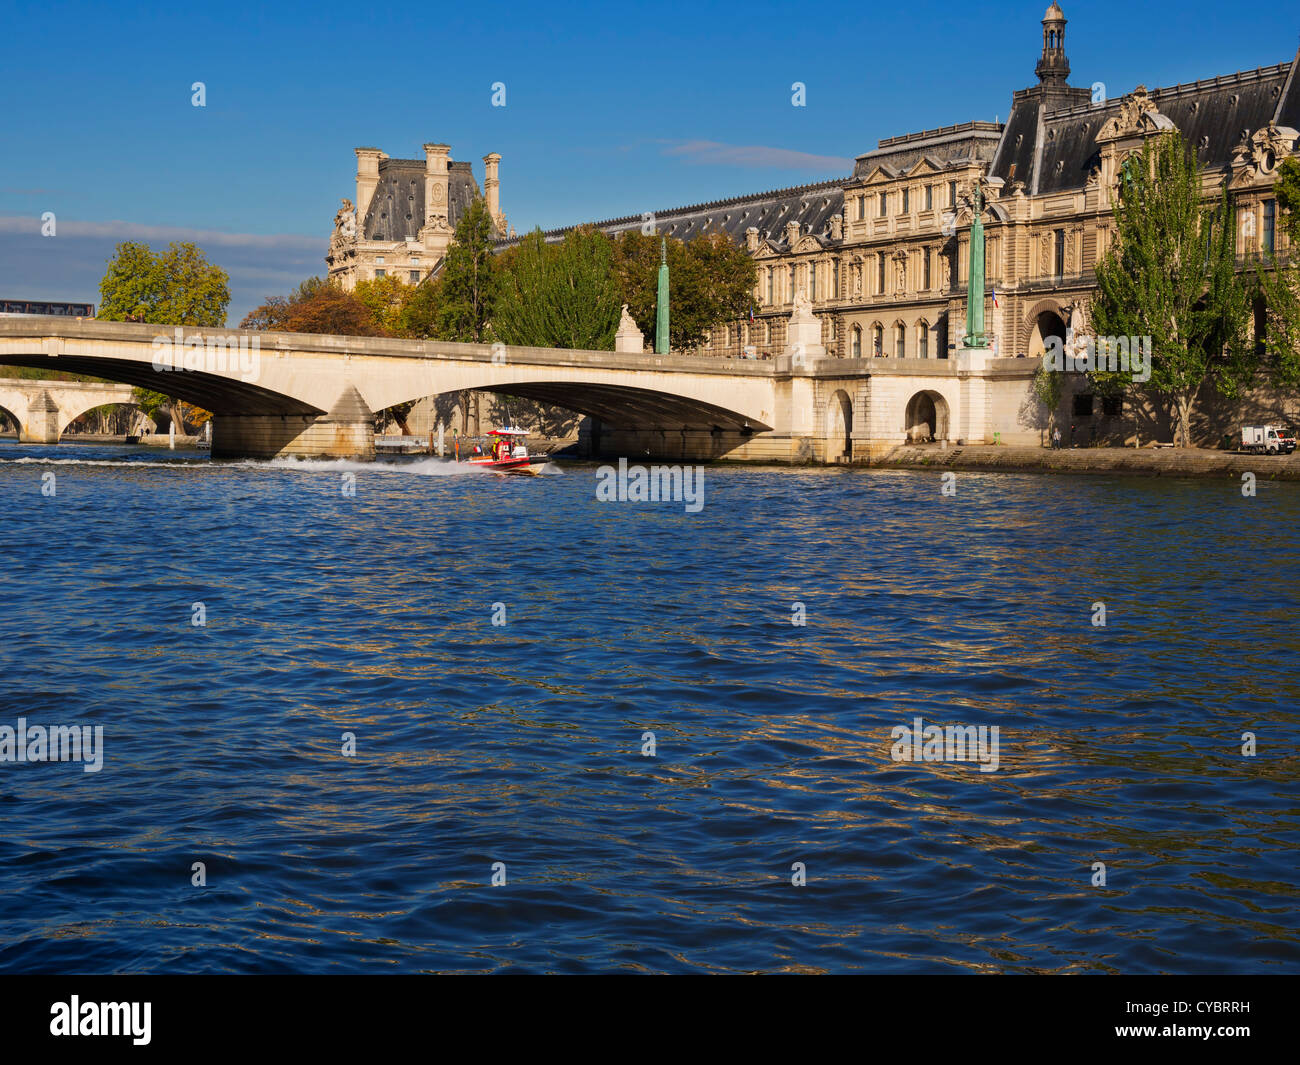 Fire Services rescue boat on the Seine River, Paris. Firemen on a rescue boat practice on the Seine in front of the Louvre. Stock Photo